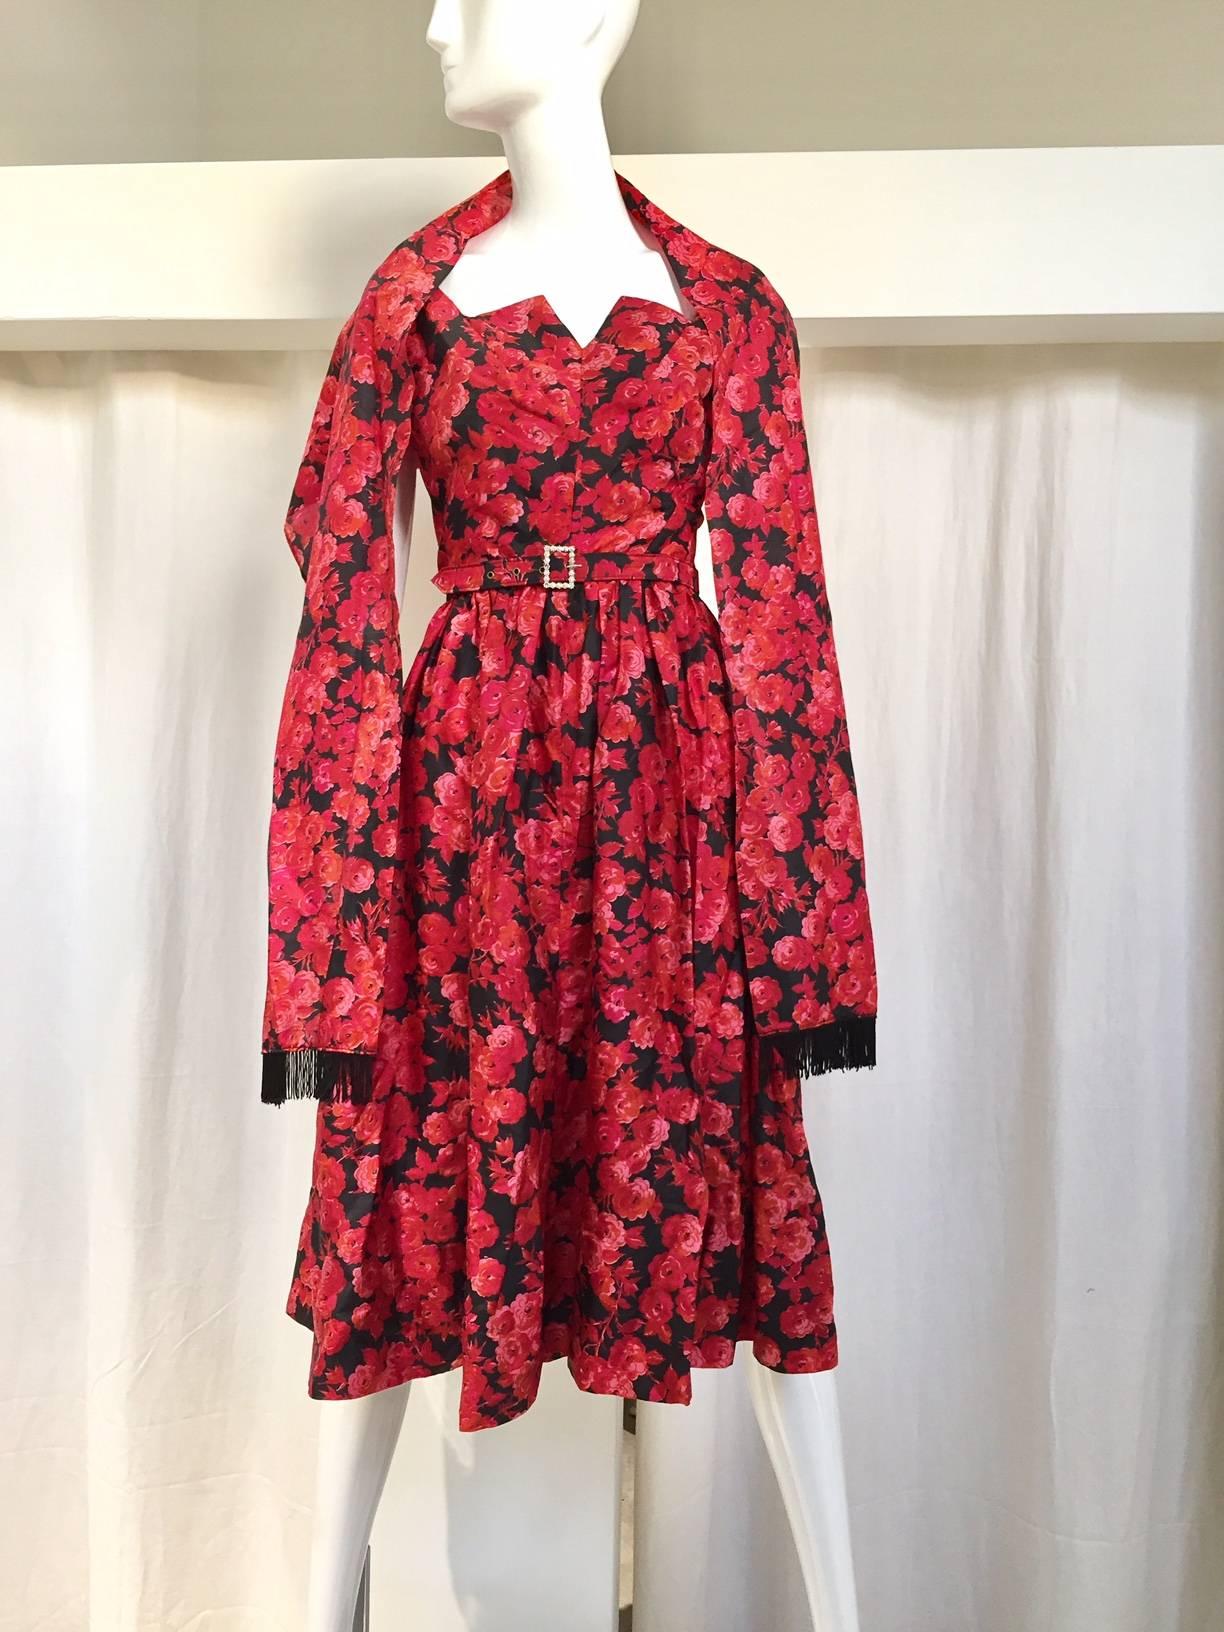 1950s floral print red and black floral print cocktail dress at 1stDibs